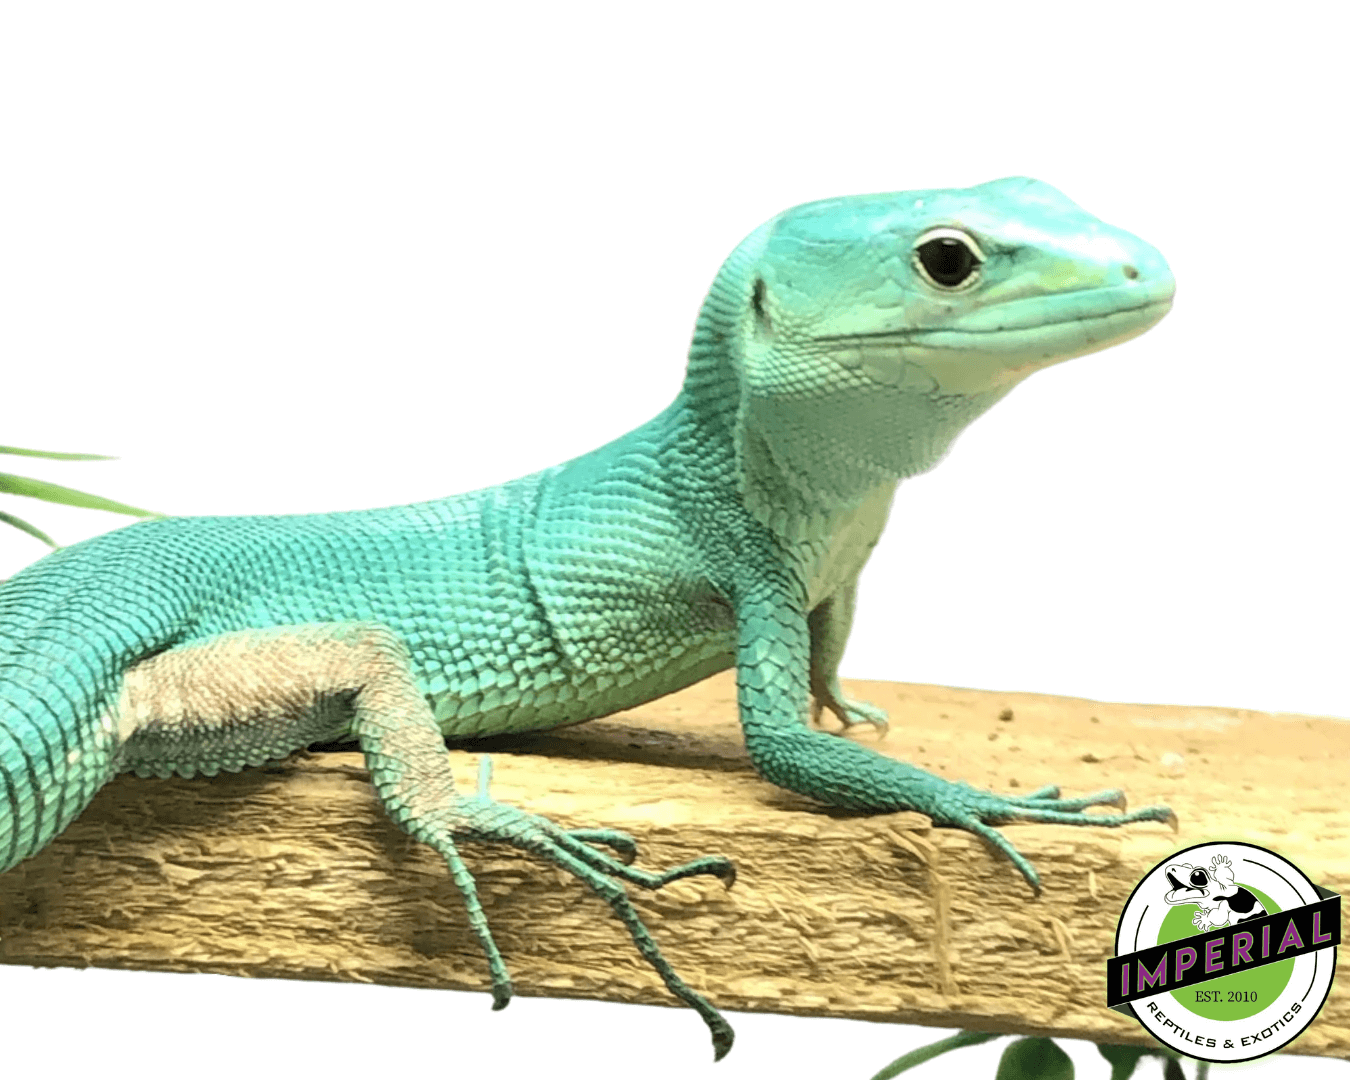 green keeled lizard for sale, buy reptiles online